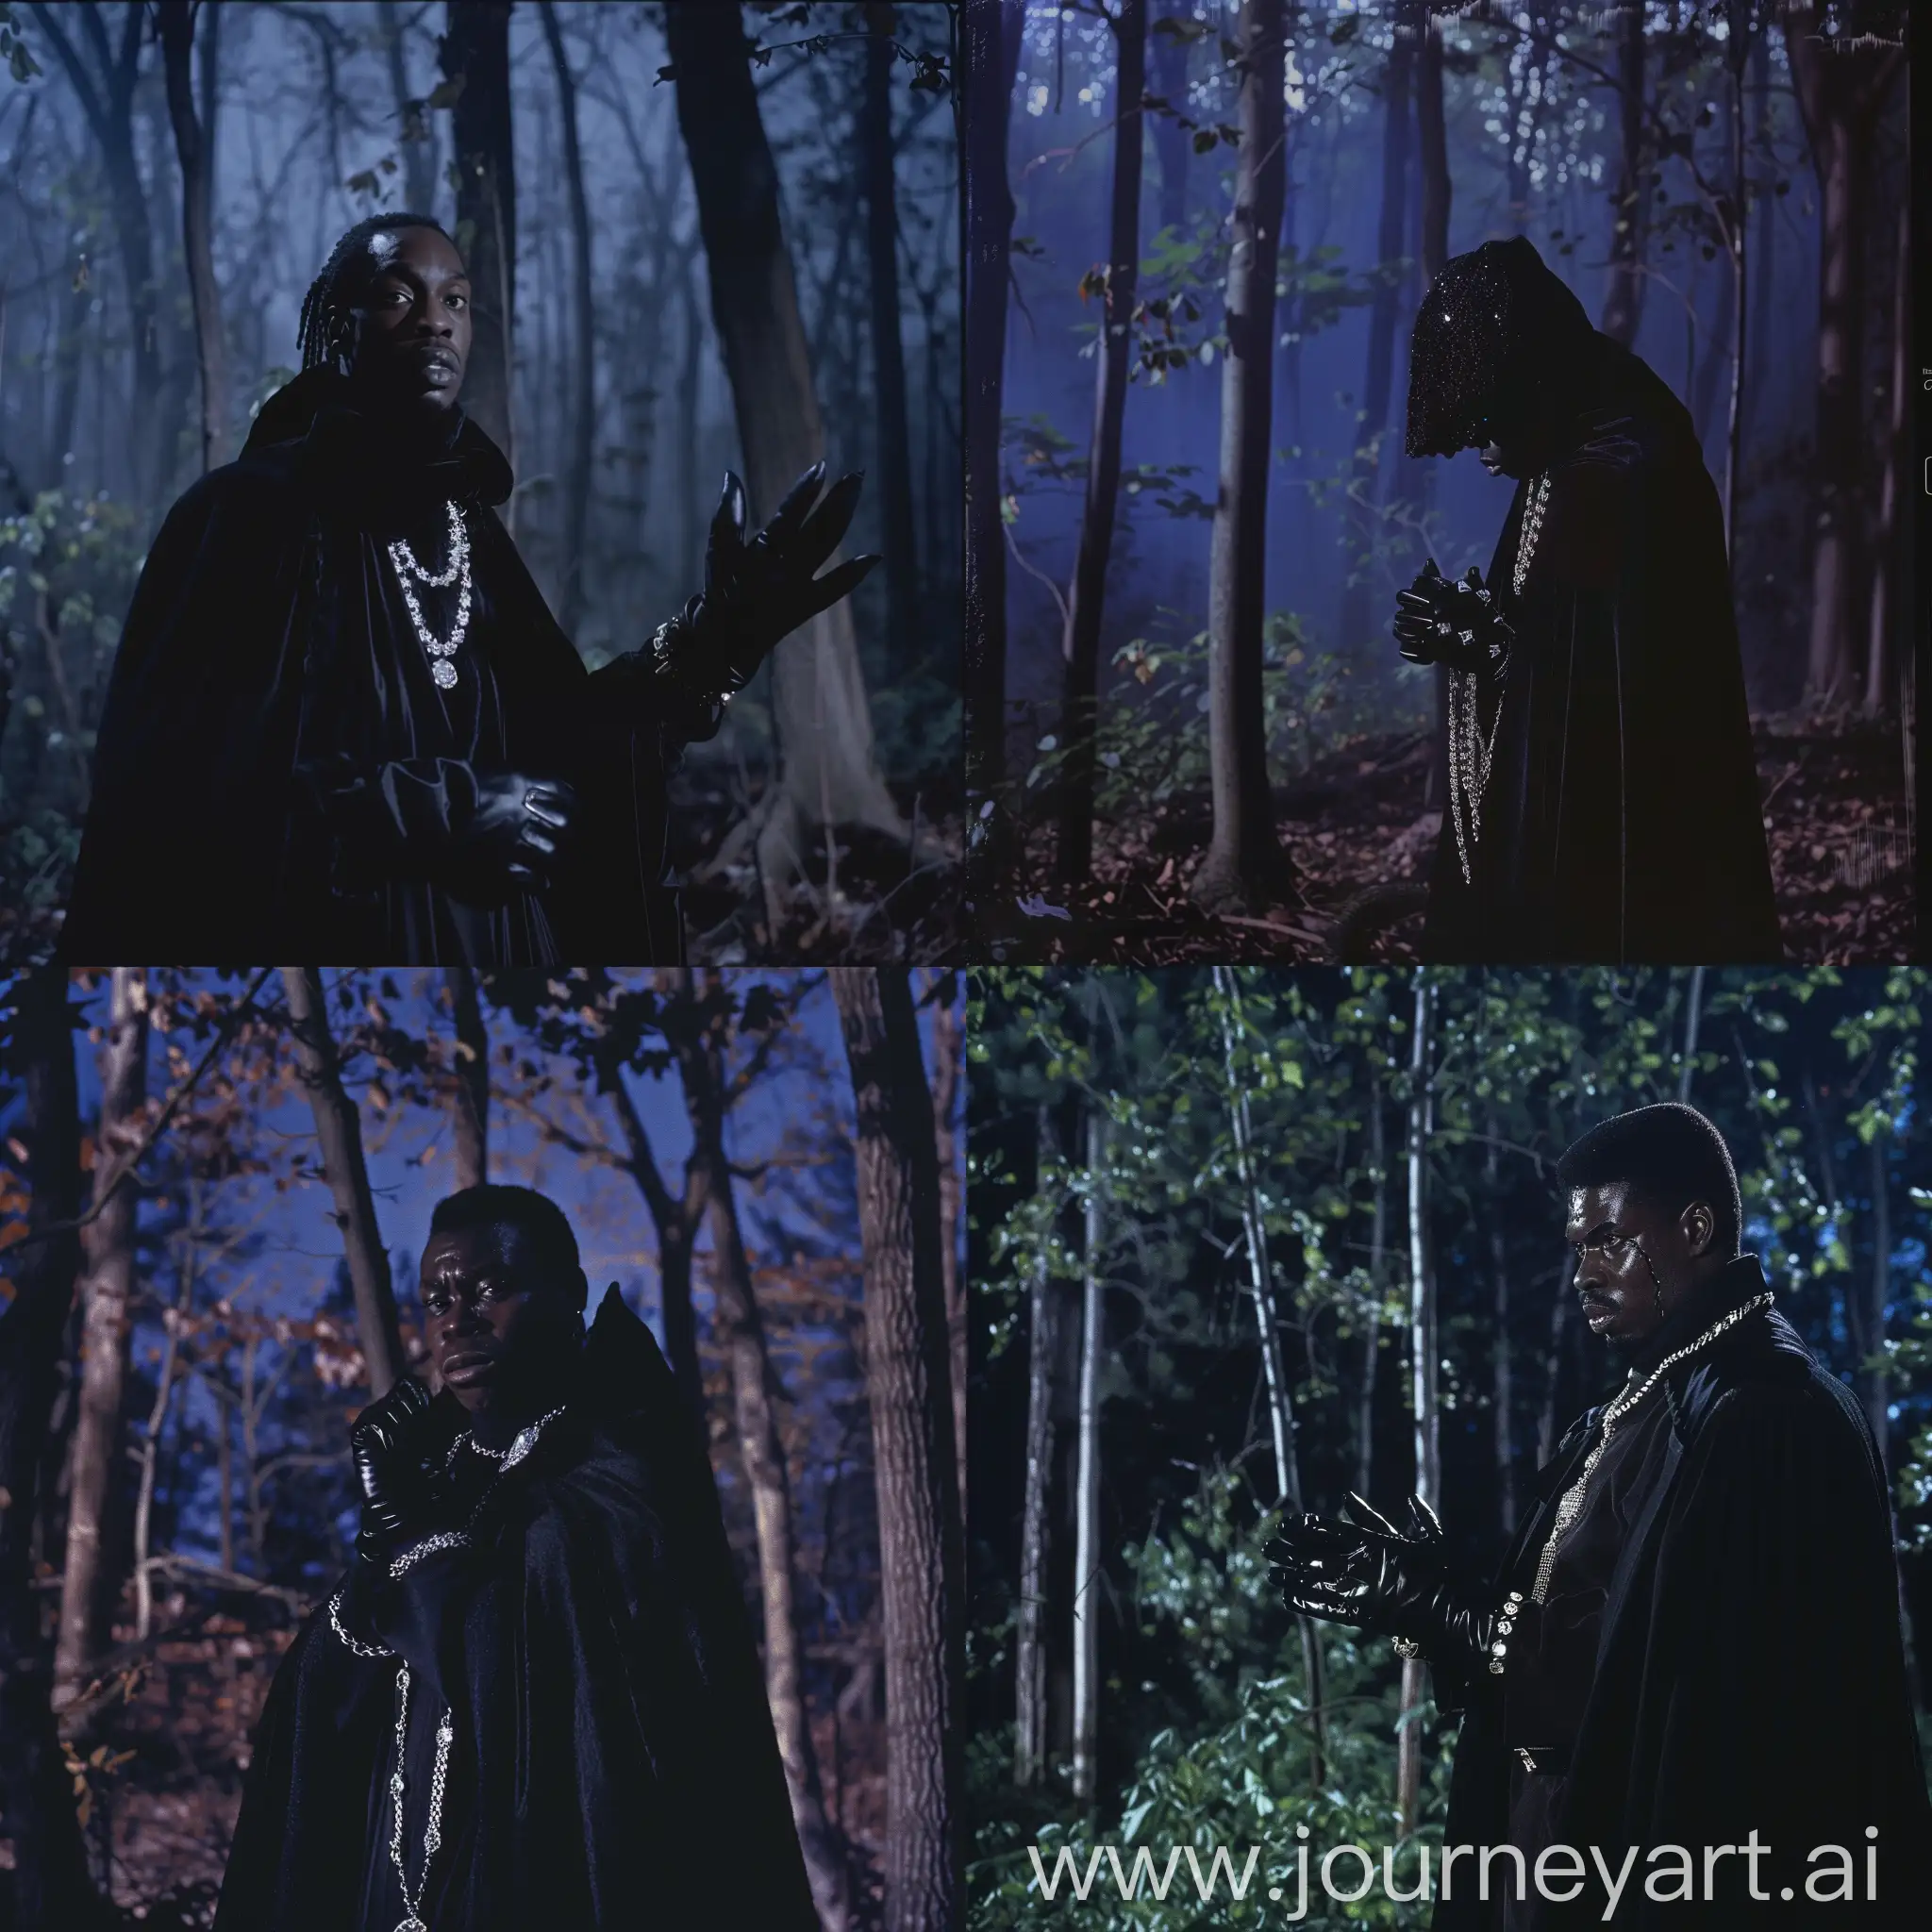 Nighttime-Forest-Scene-with-Cloaked-Figure-in-Diamond-Chains